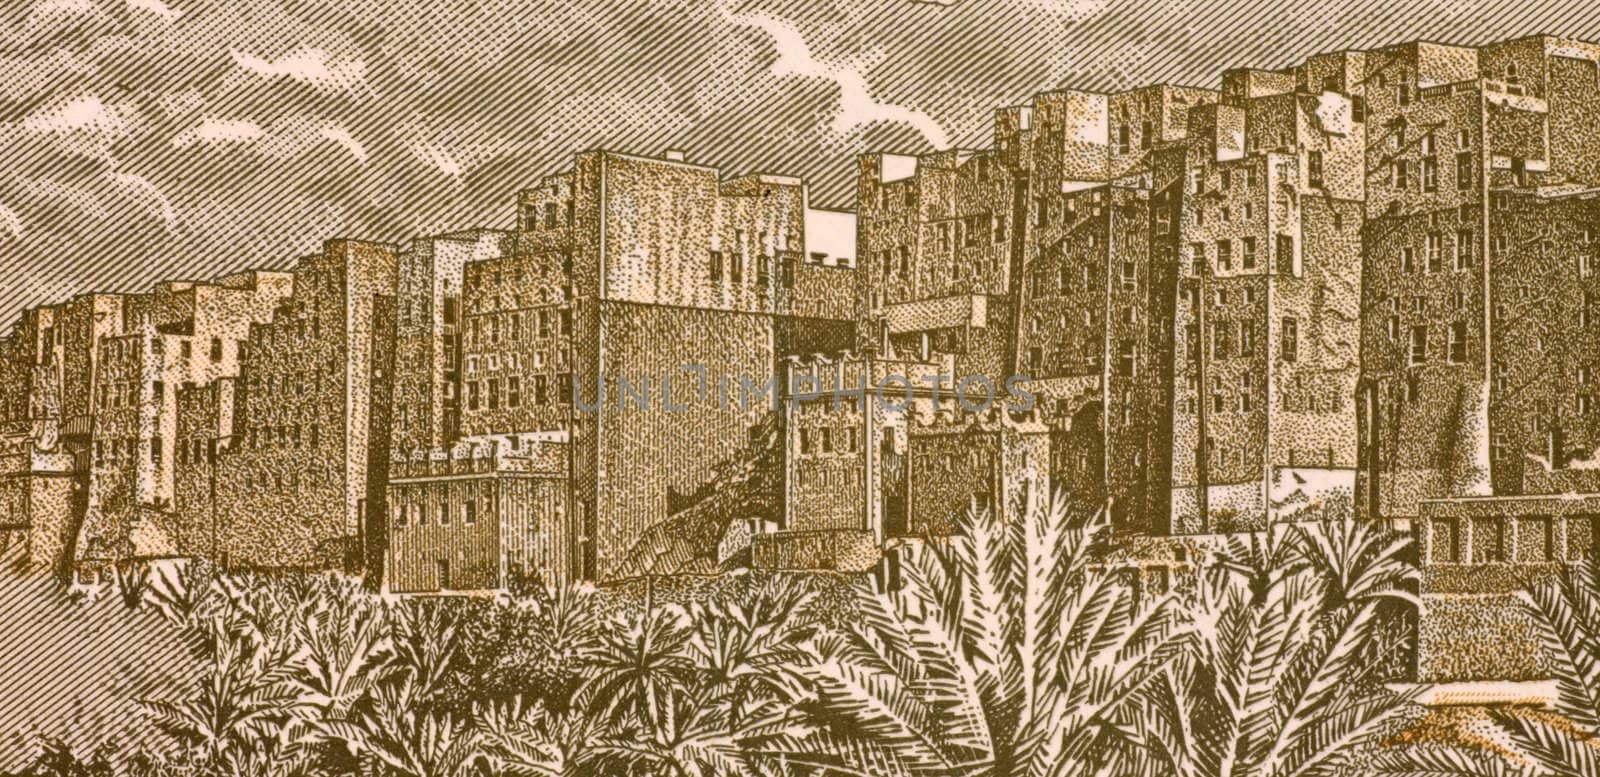 Shibam City on 50 Rials 1993 Banknote from Yemen. The houses of Shibam are all made of mud bricks and about 500 of them are tower houses that rise 5 to 16 stories high while each floor has one or two apartments.